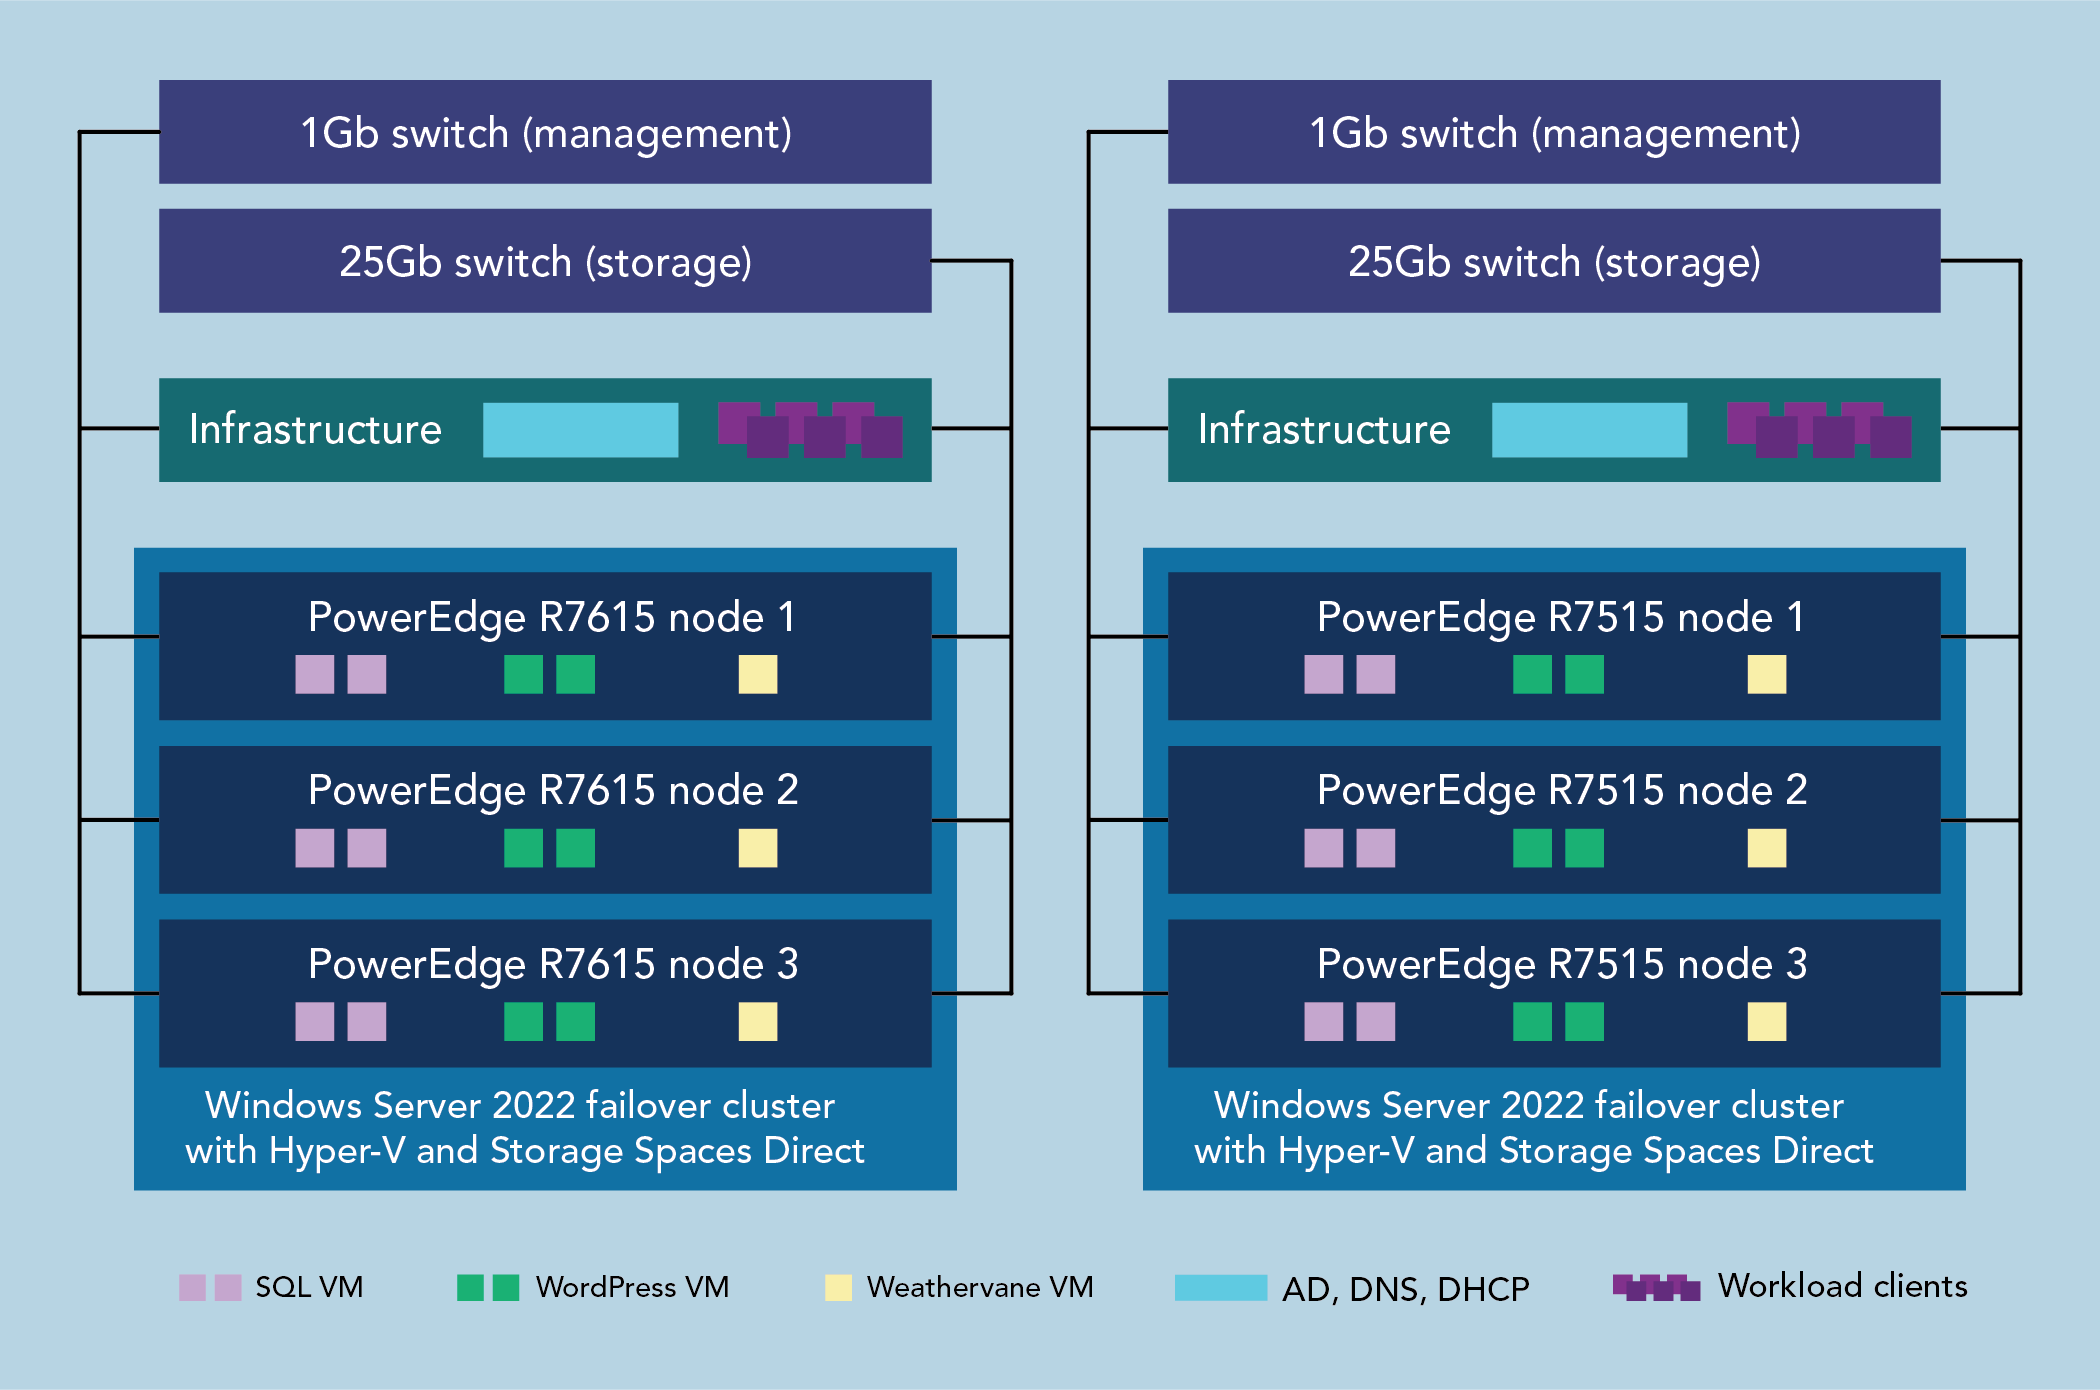 Test bed diagram of the two three-node Windows Server 2022 failover clusters with Hyper-V and Storage Spaces Direct. One cluster has 16G Dell PowerEdge R7615 servers and the other has 15G Dell PowerEdge R7515 servers. Each server hosts two SQL VMs, two WordPress VMs, and one Weathervane VM. In addition to the servers, each cluster includes a 1Gb switch for management, a 25Gb switch for storage, and an infrastructure host that includes AD, DNS, DHCP, and workload clients.